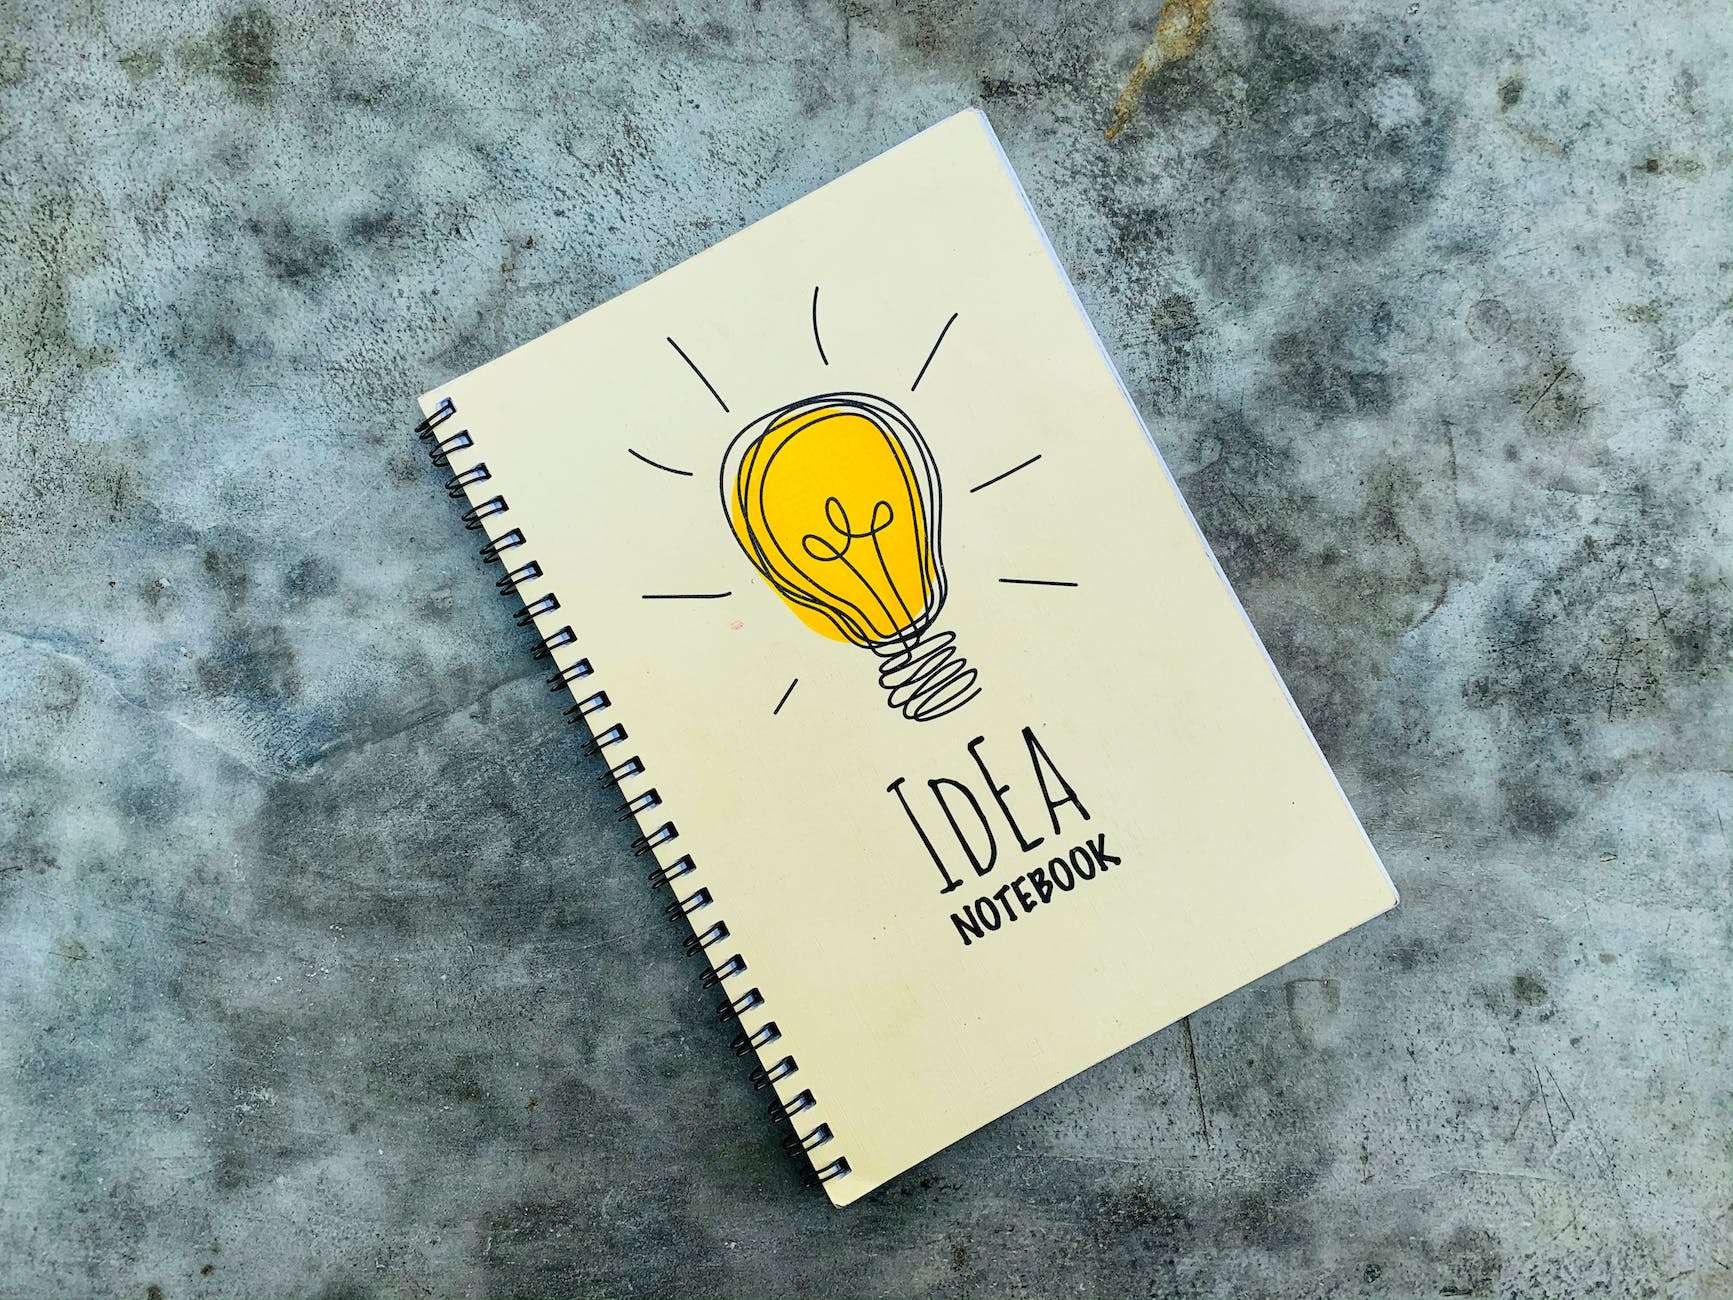 light bulb picture on notebook cover